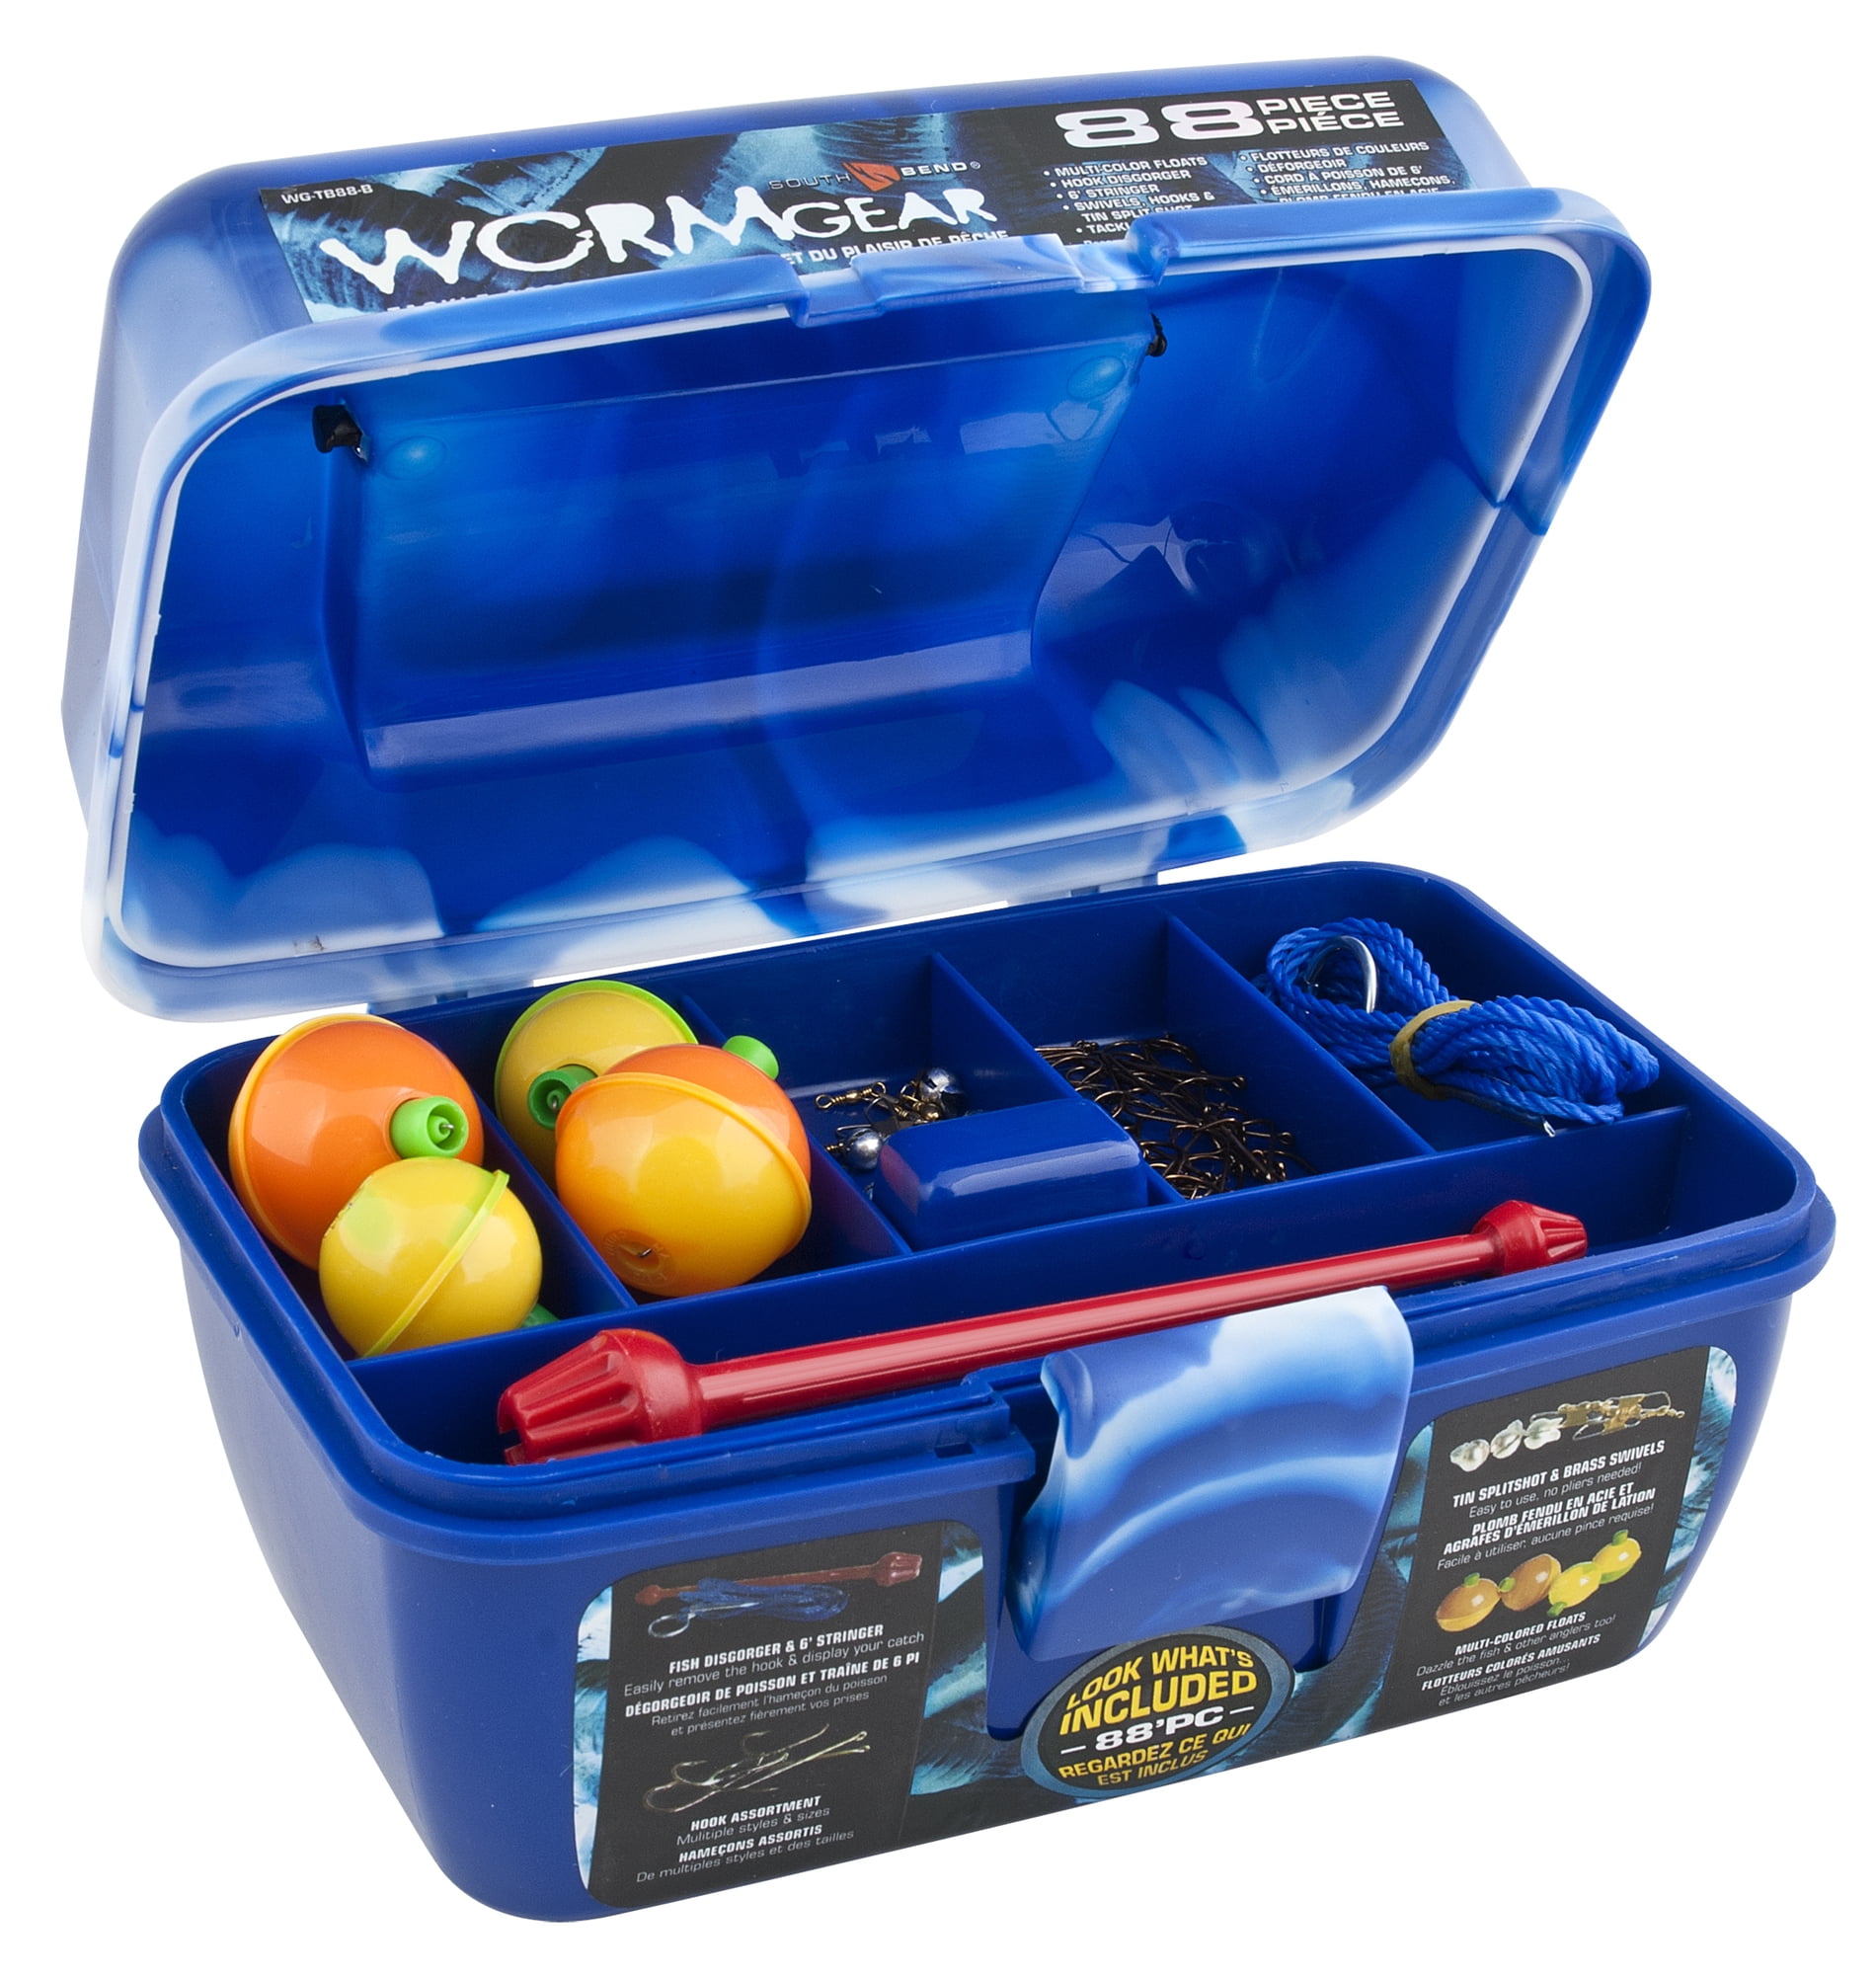 South Bend Worm Gear 88-Piece Loaded Fishing Tackle Box, Blue